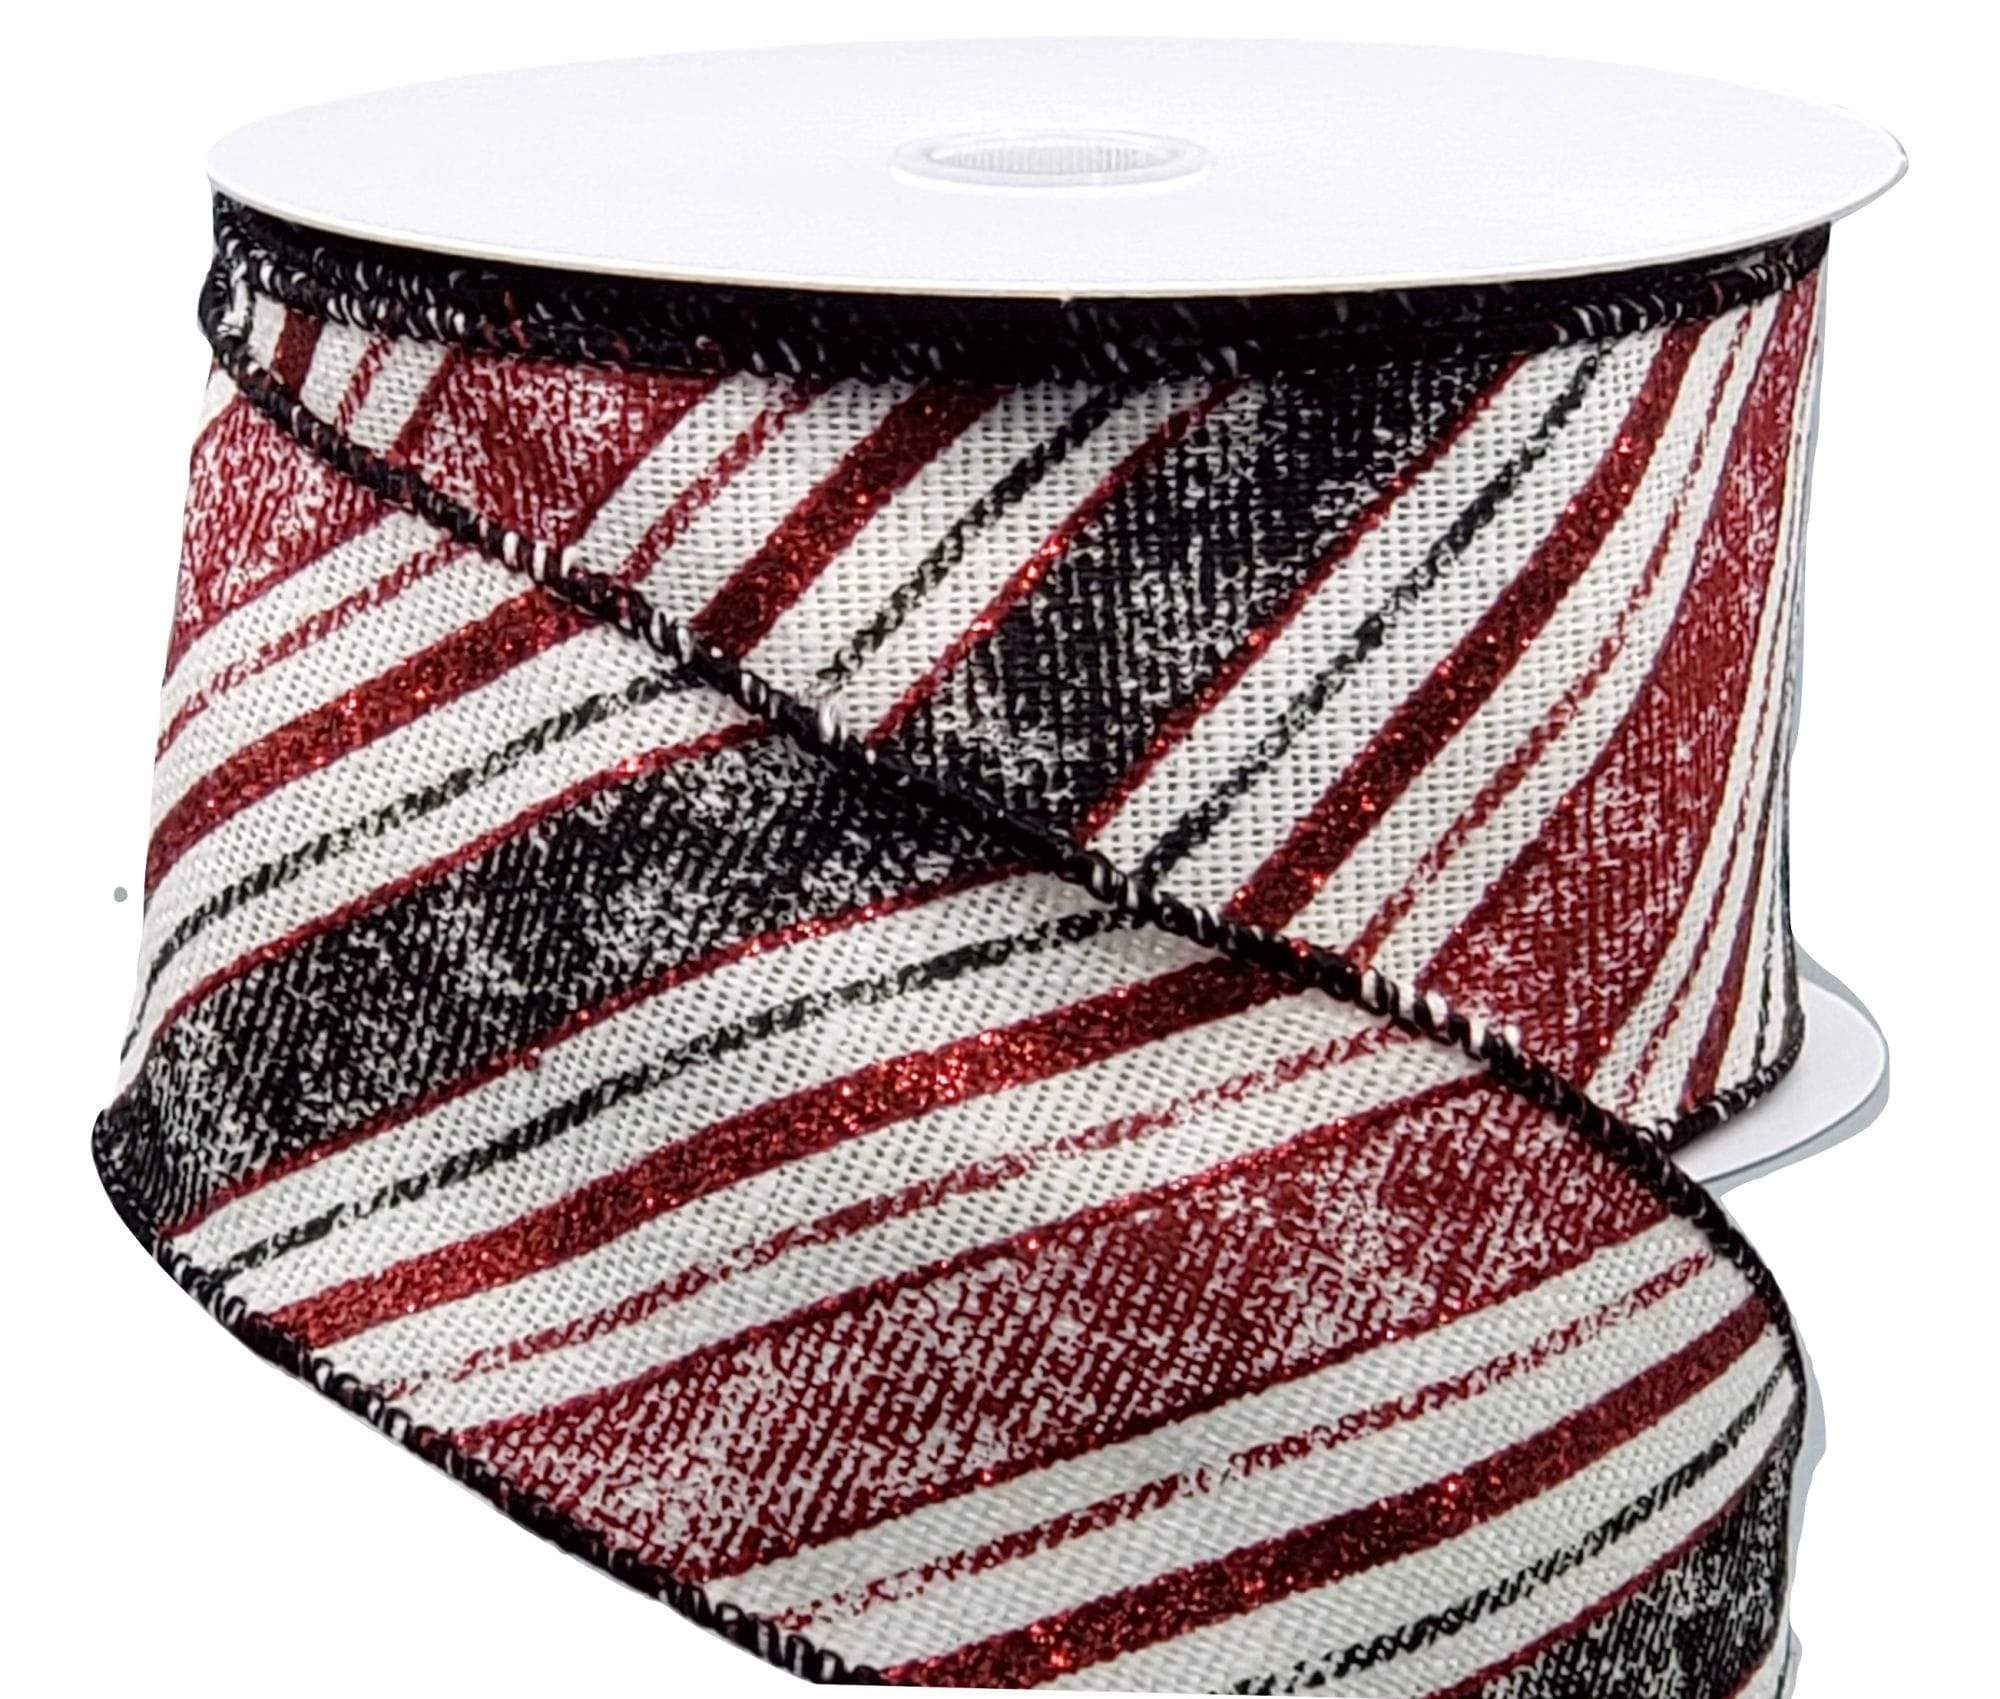 2.5 Red White Glitter Thick Stripe Satin Wired Ribbon on a 10 Yard Roll